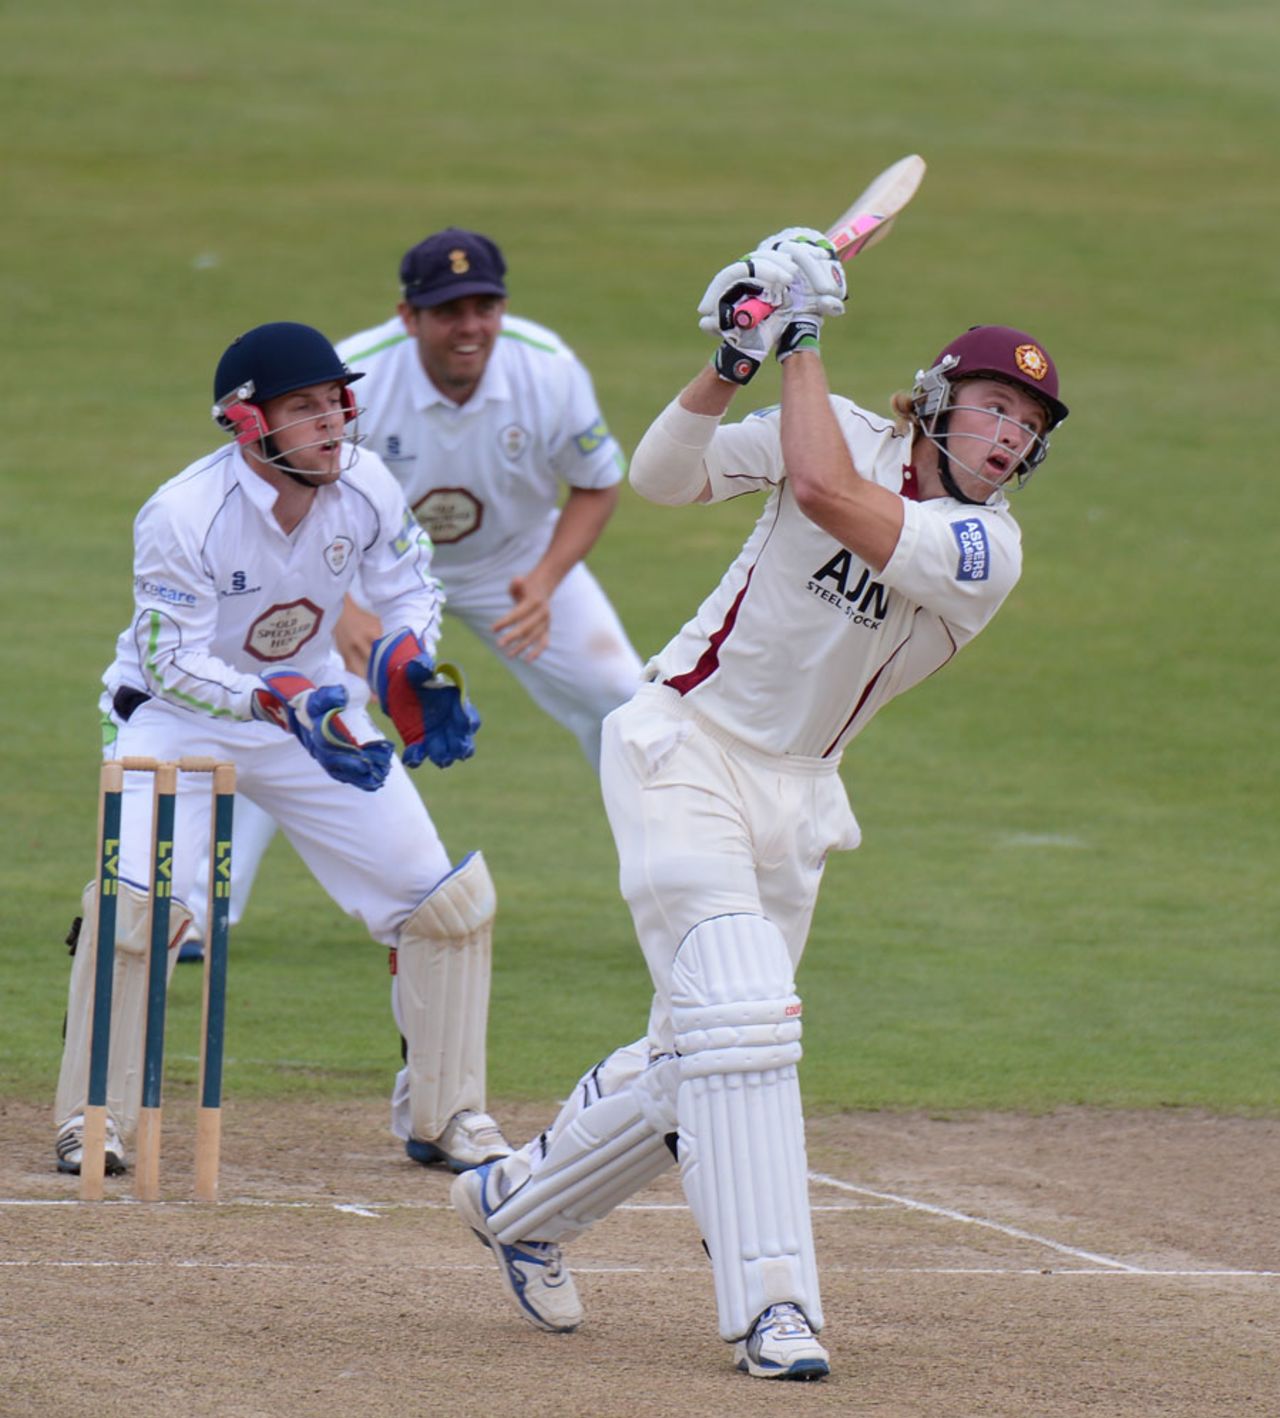 David Willey scored an unbeaten 60 batting at No. 9, Northamptonshire v Derbyshire, County Championship, Division Two, Northampton, August 22, 2012